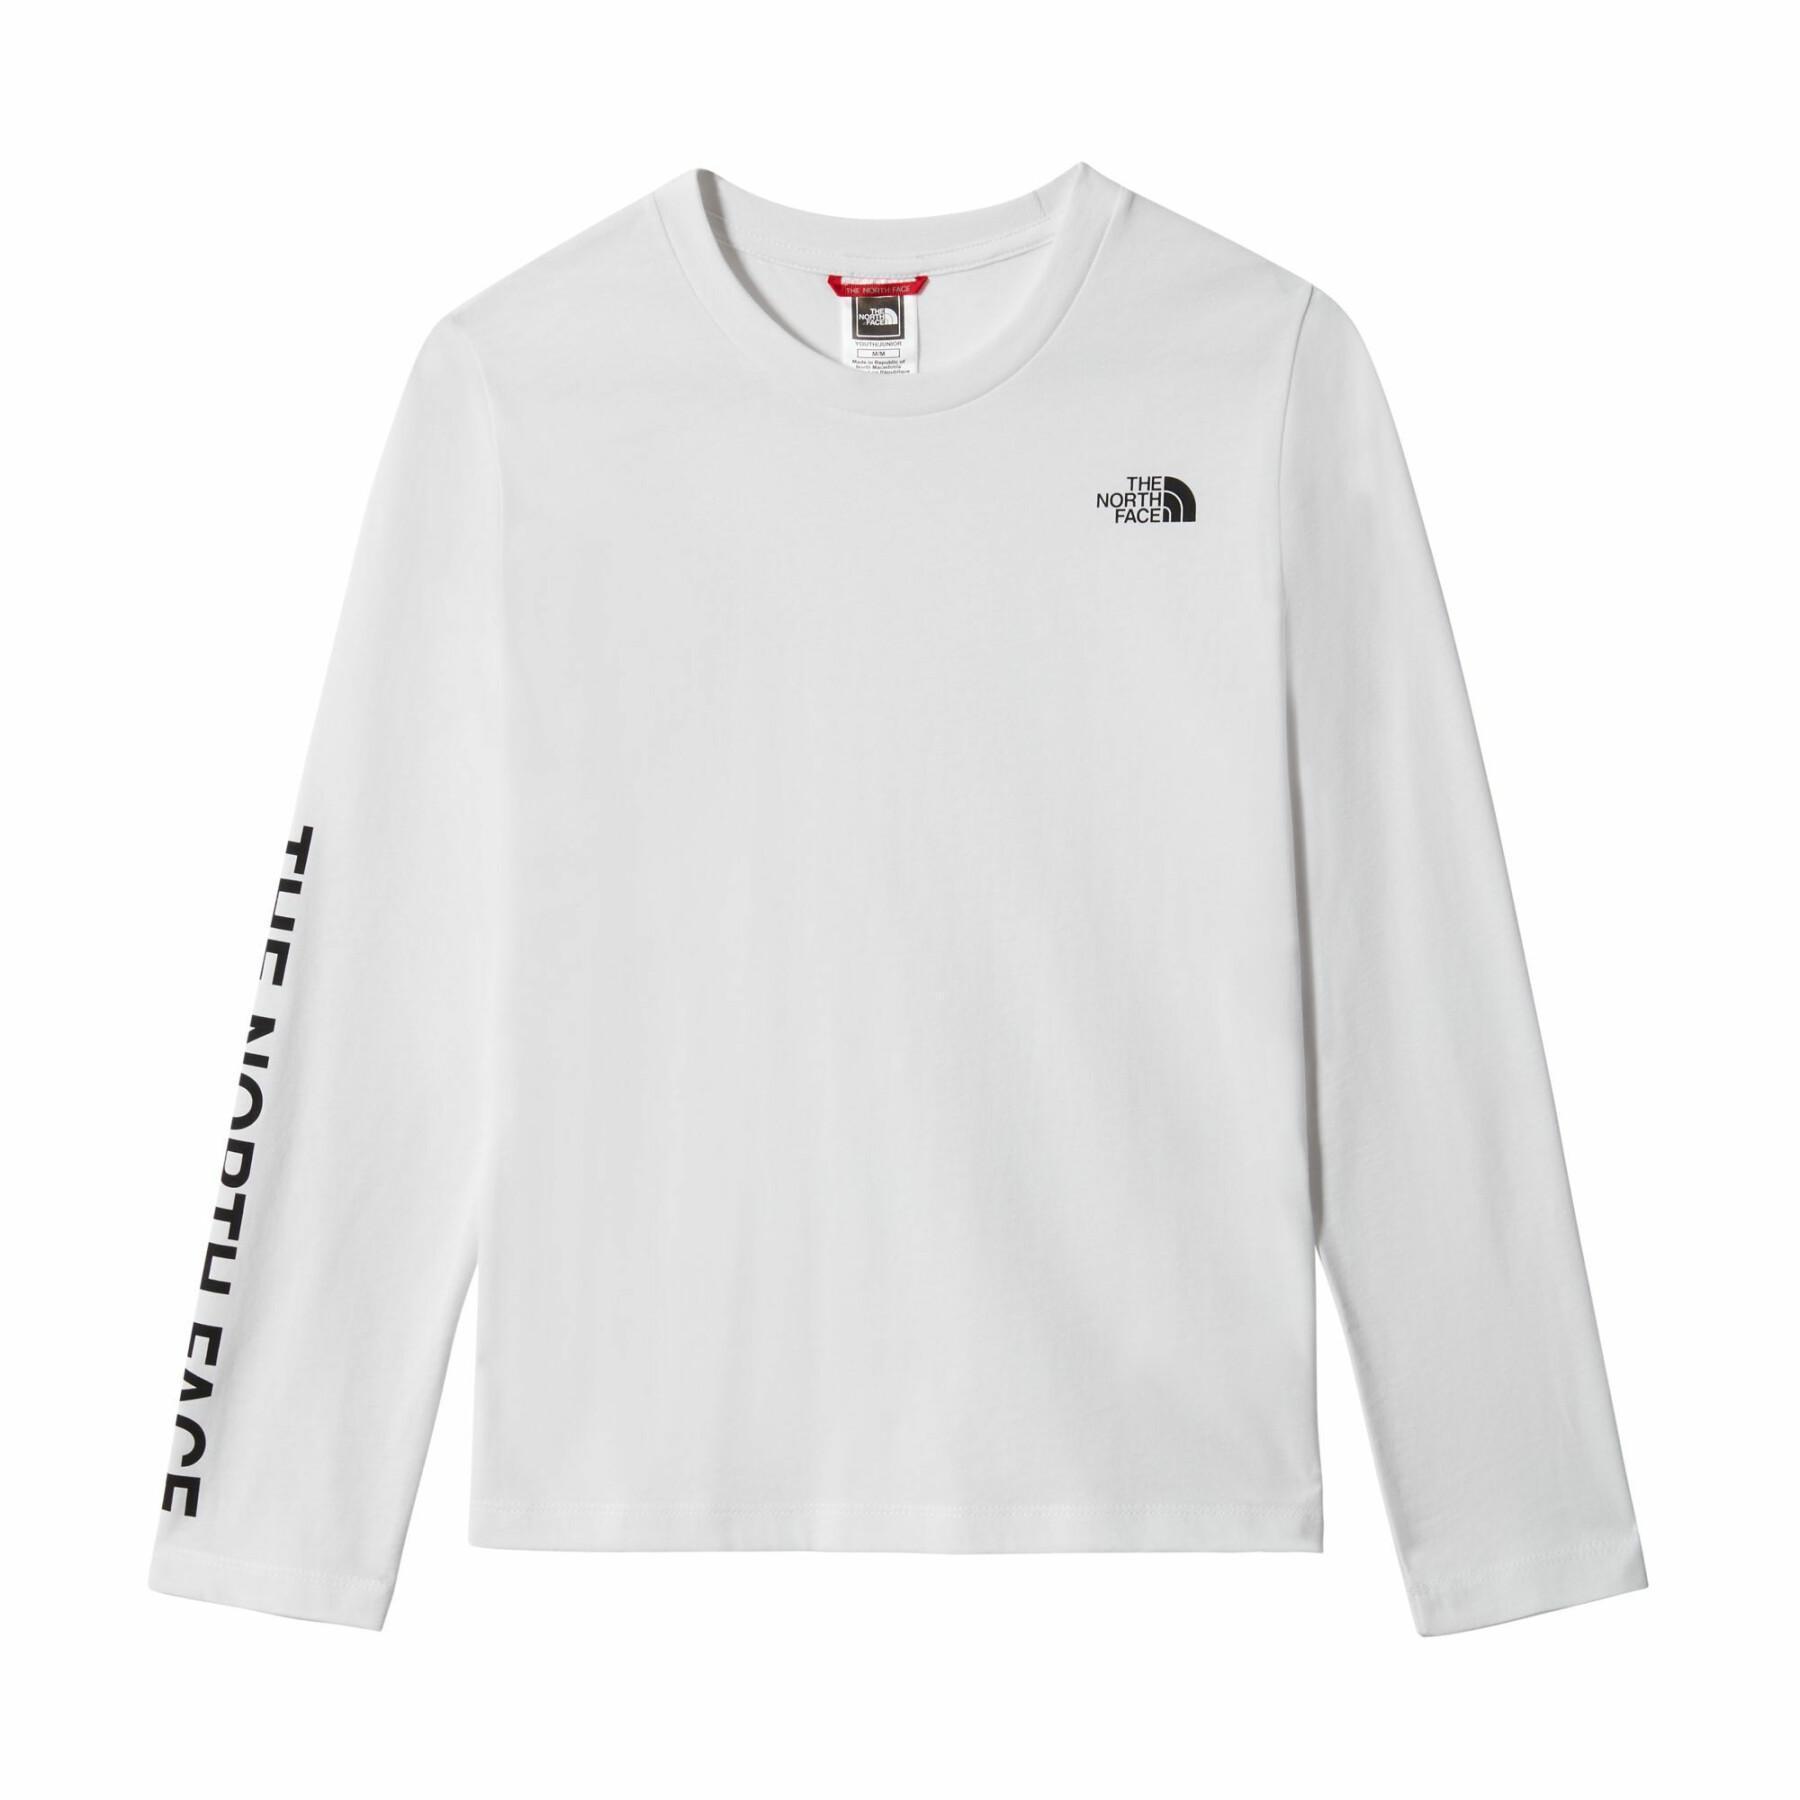 Kinder T-Shirt The North Face Simple Dome